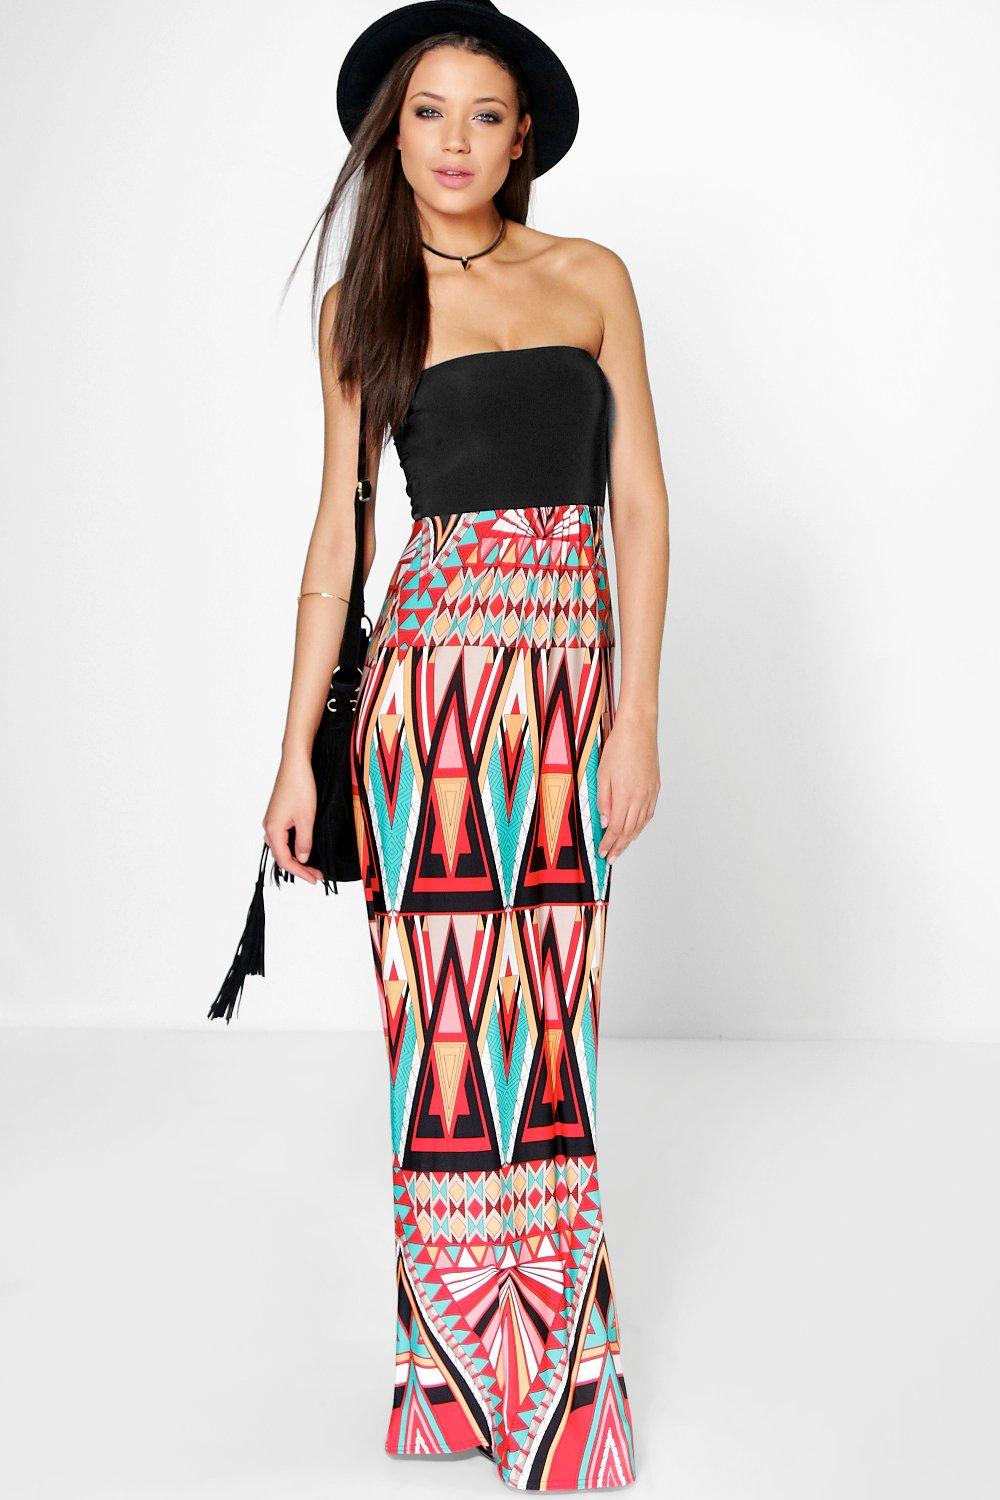 Simple, super comfy and stylish tall maxi dresses